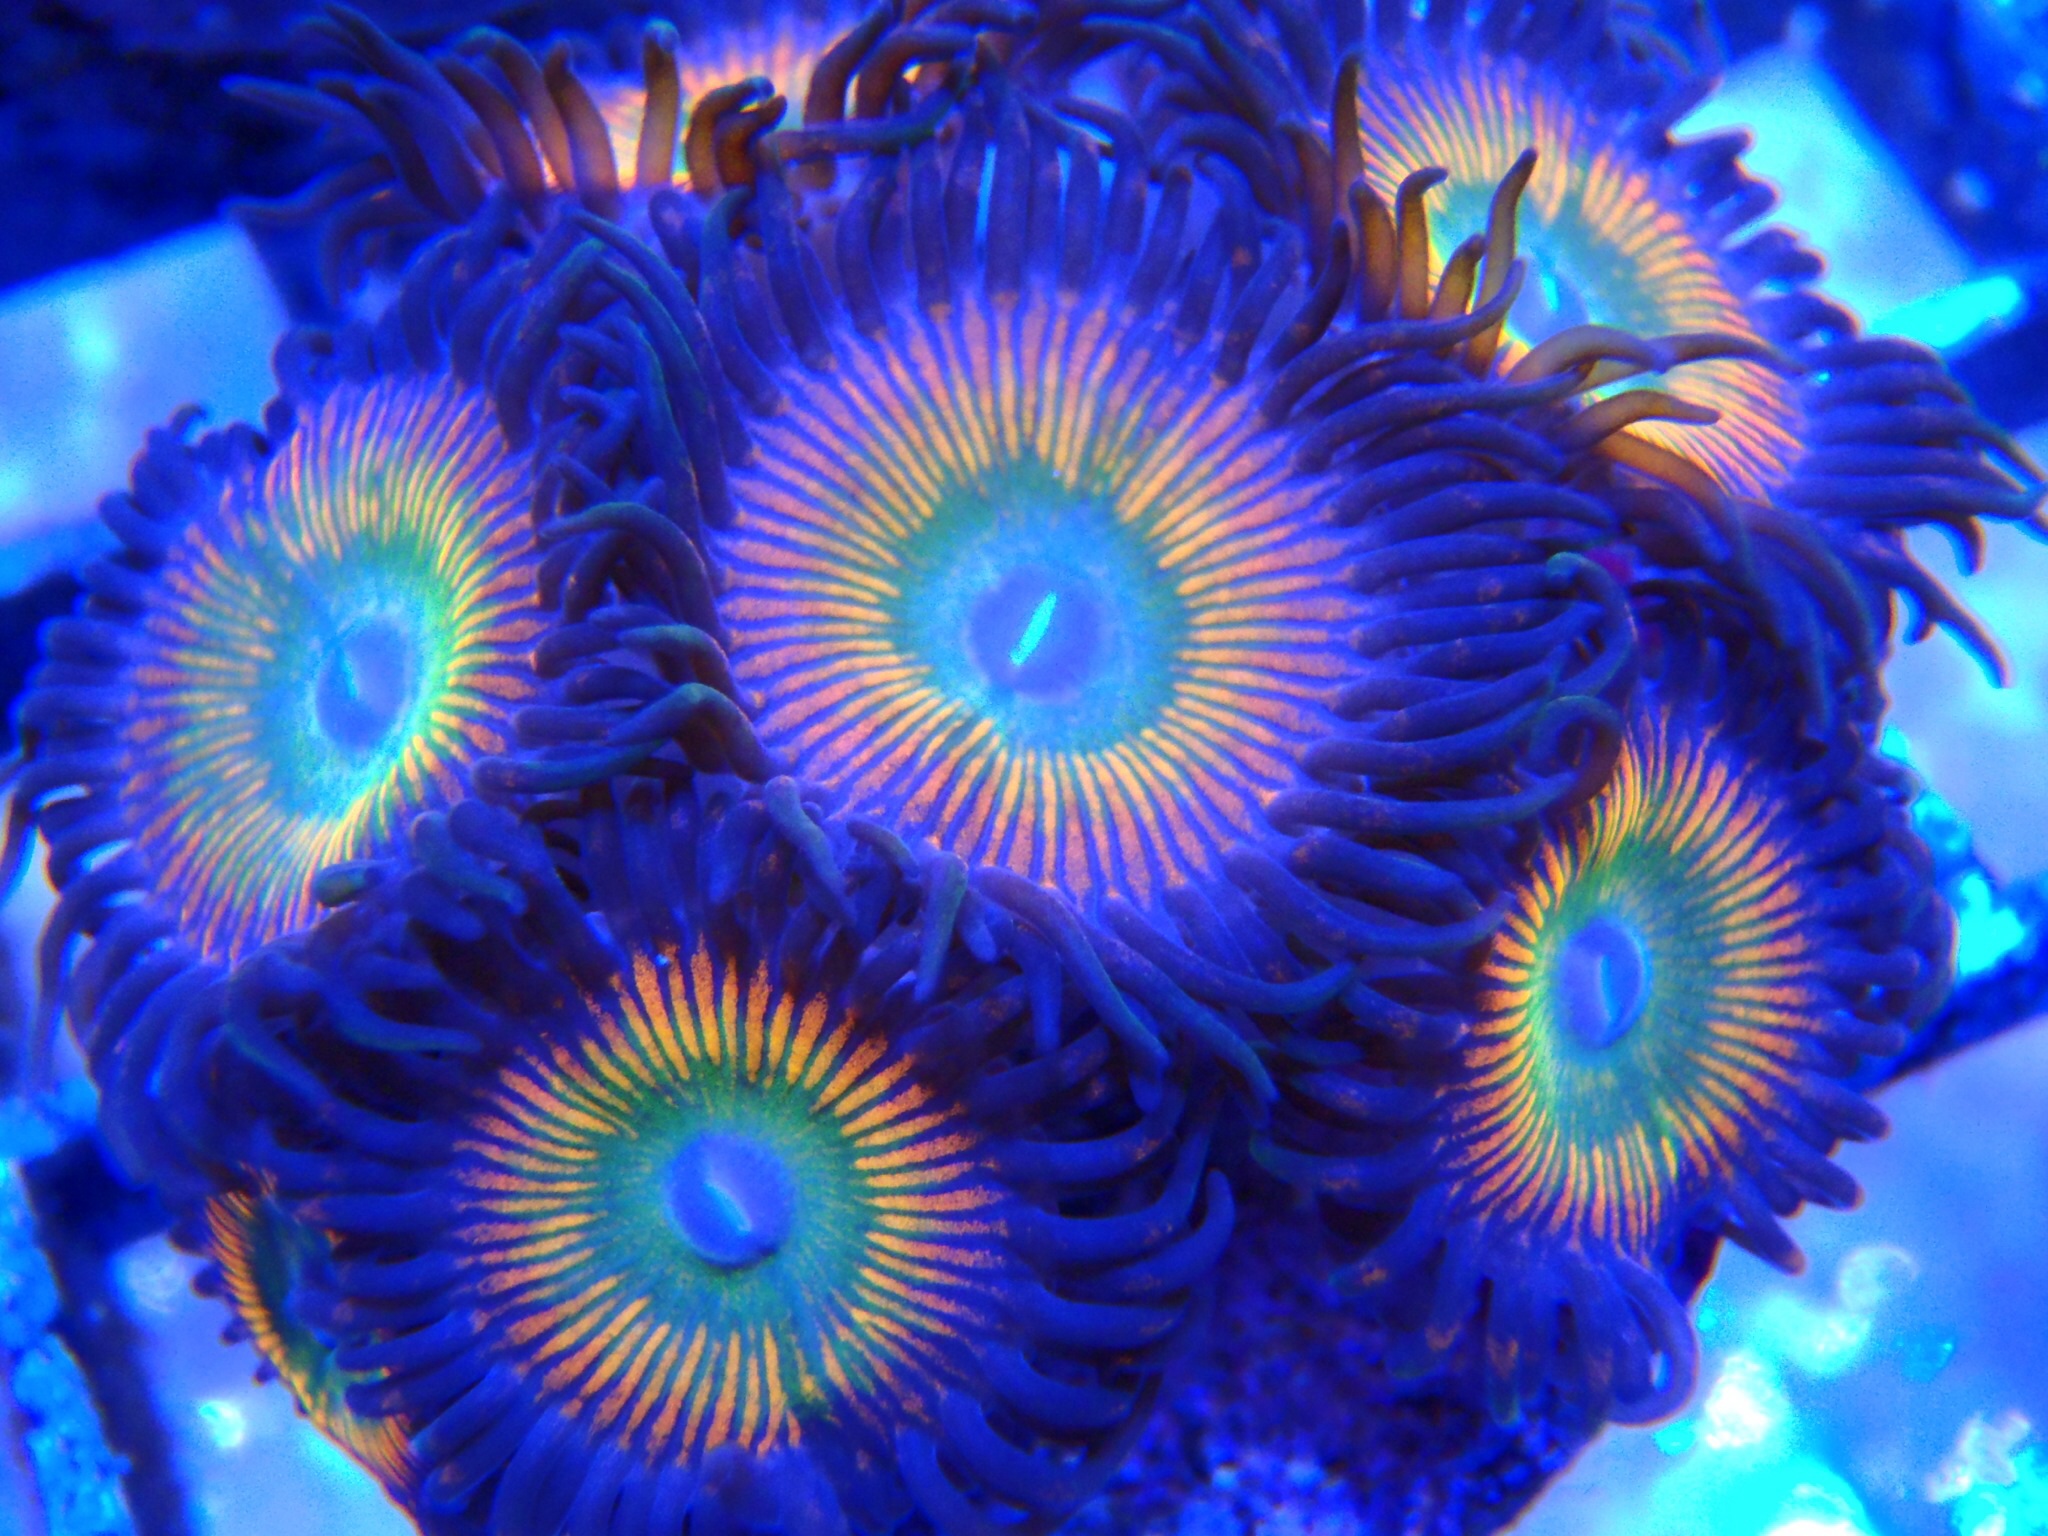 Zoabrary is a Zoanthid Library to help Identify Zoanthids and Palythoas.